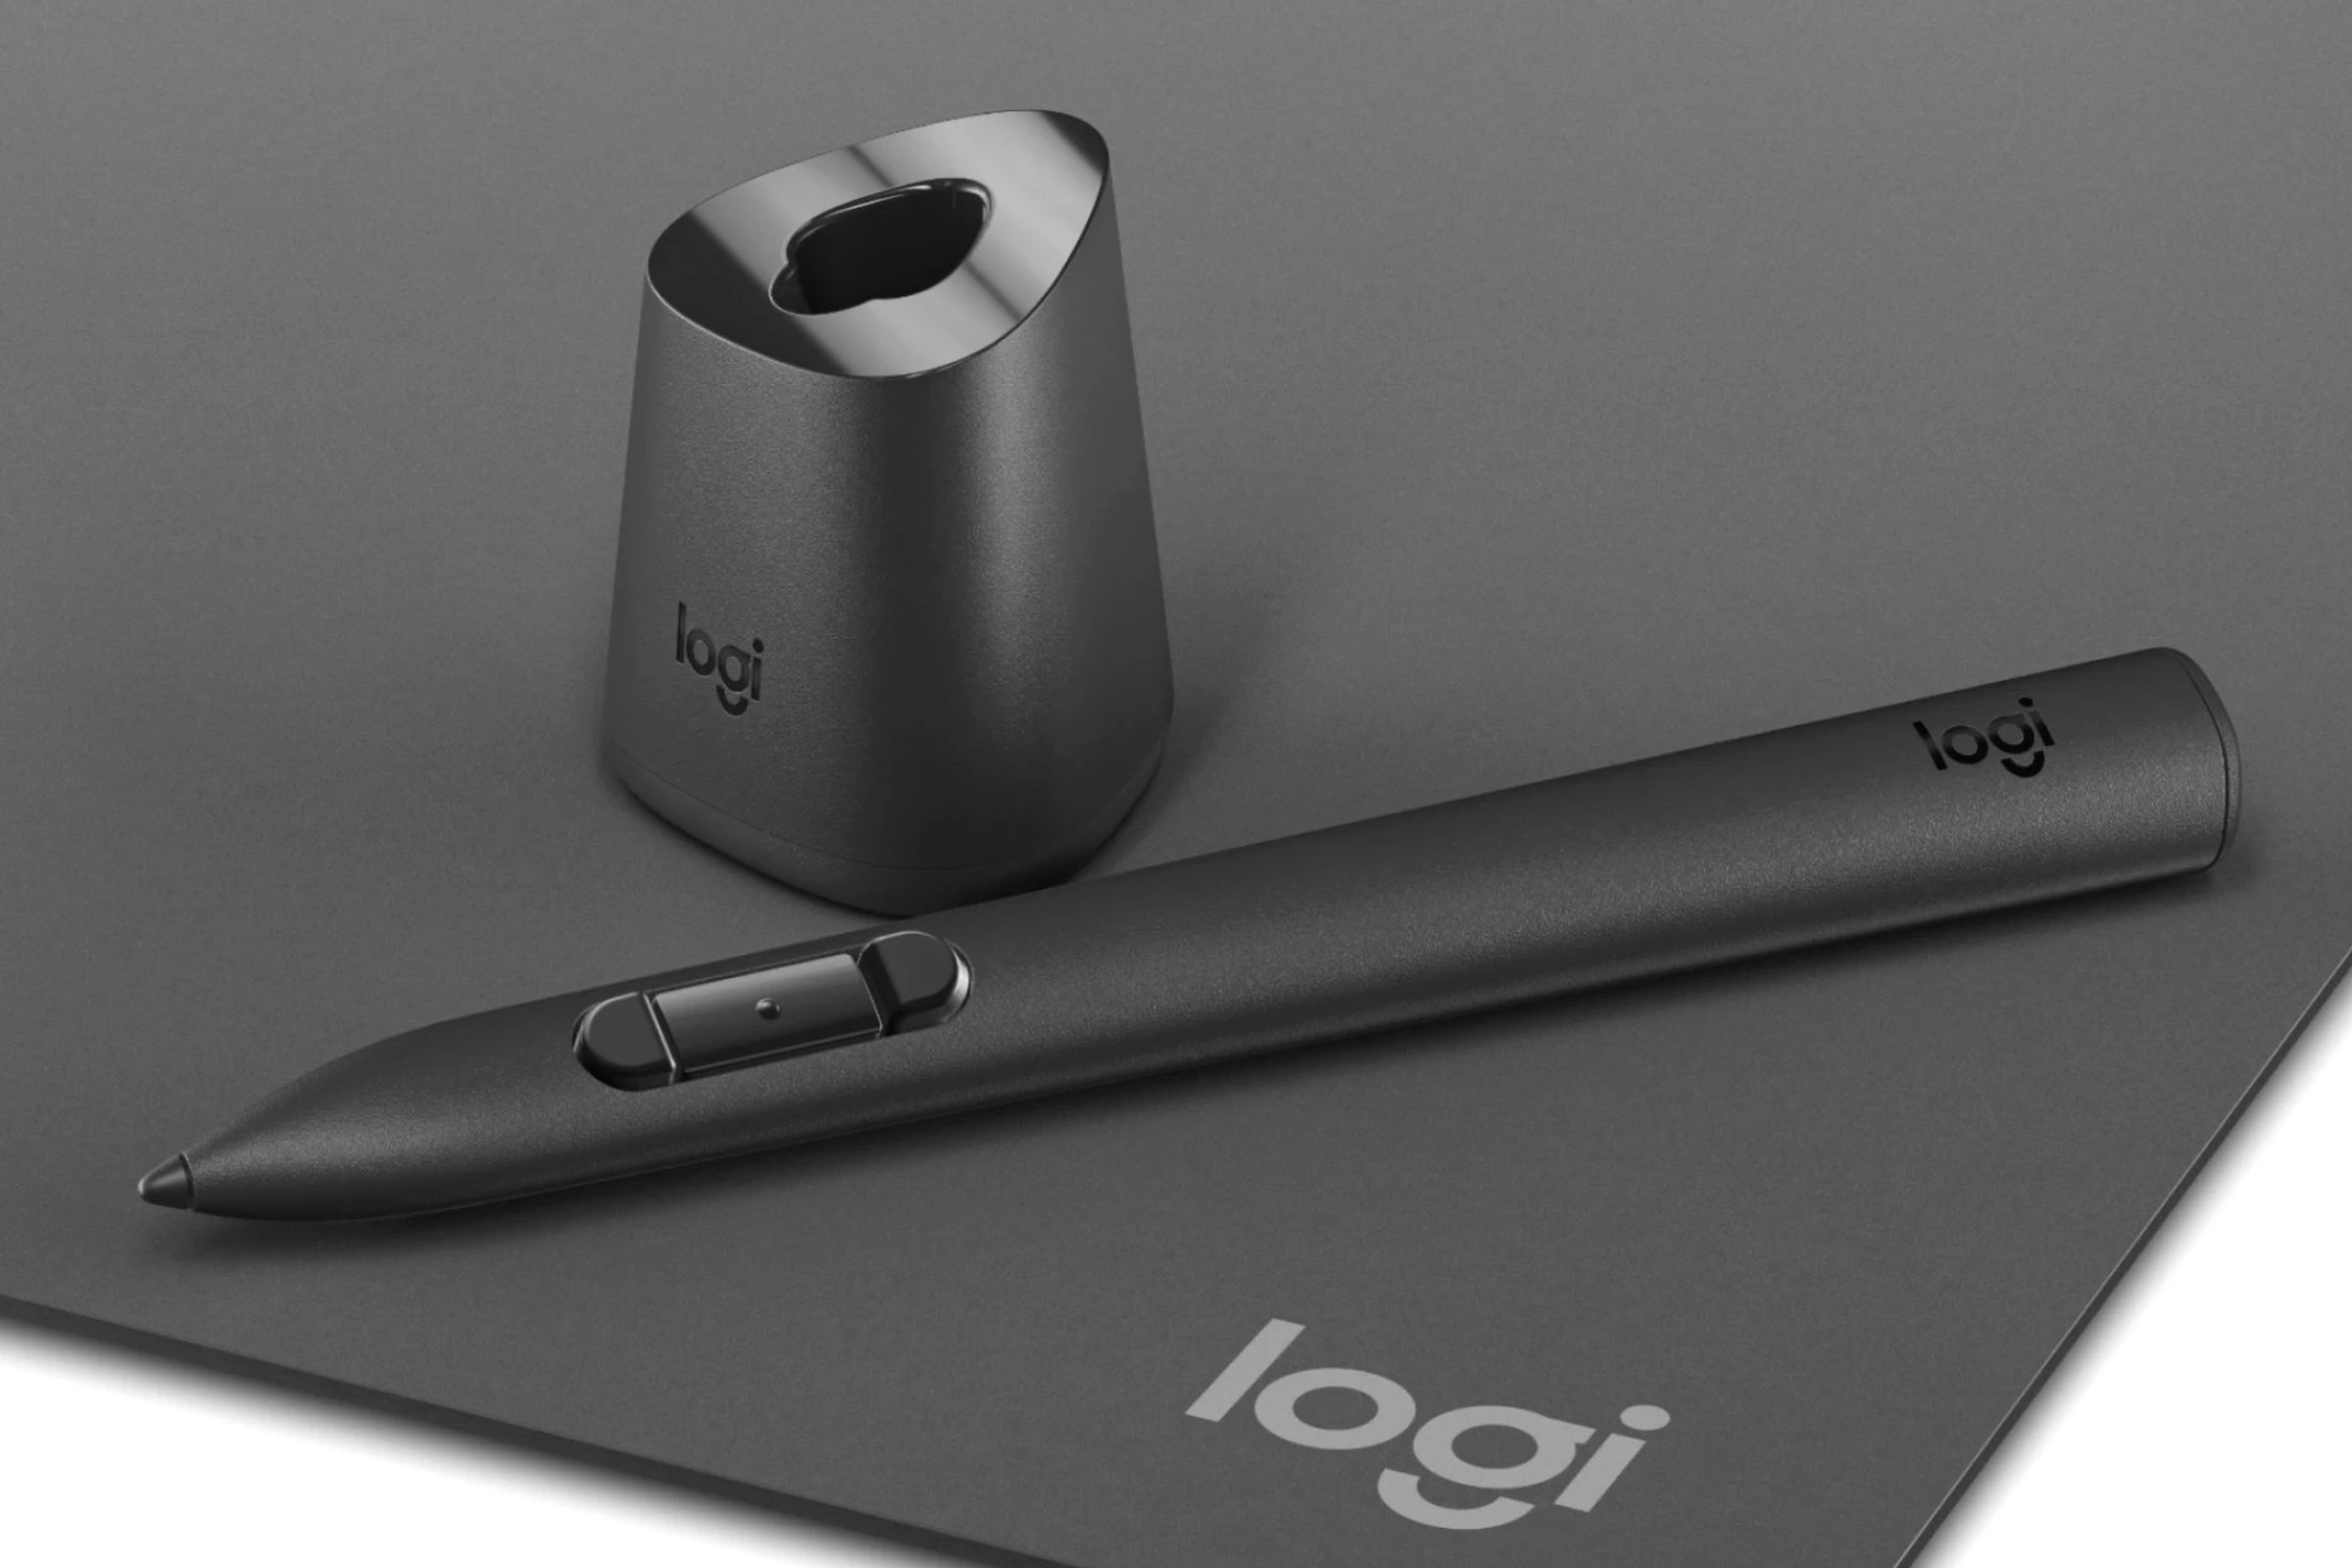 The Logitech MX Ink stylus next to its optional charging dock.